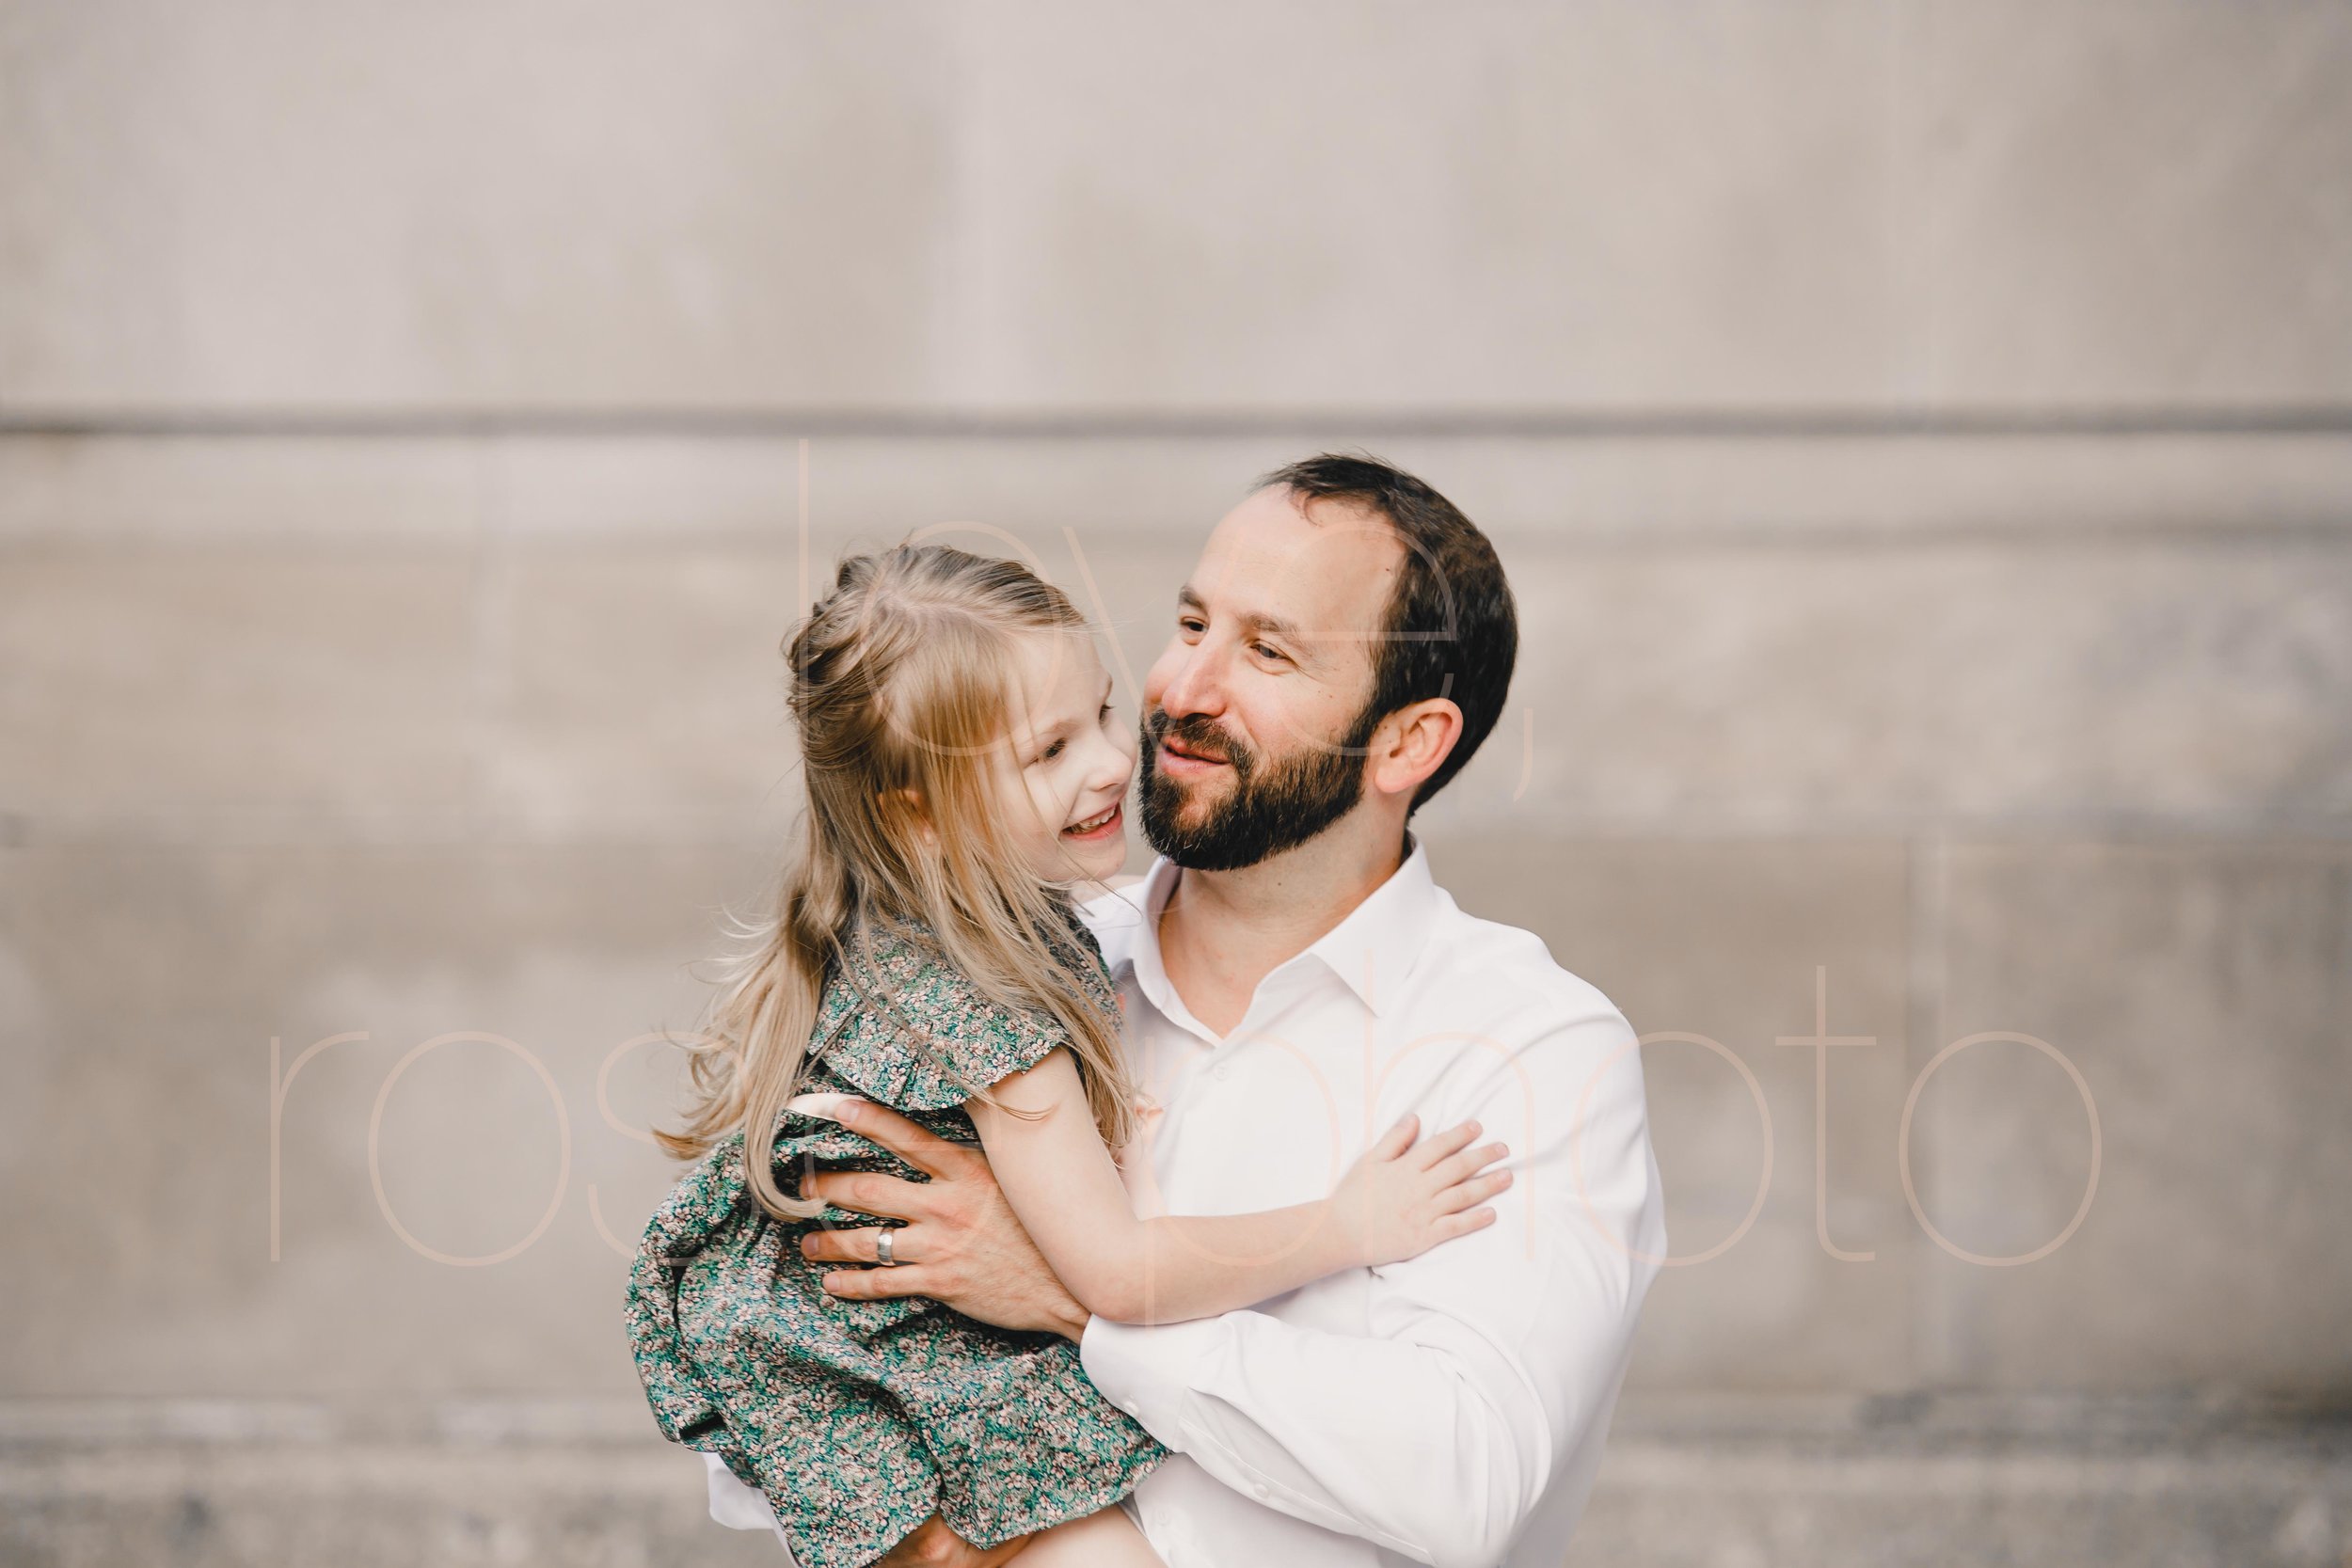 Lifestyle Photographer Chicago kids photos family shoot by Rose Photo -13.jpg